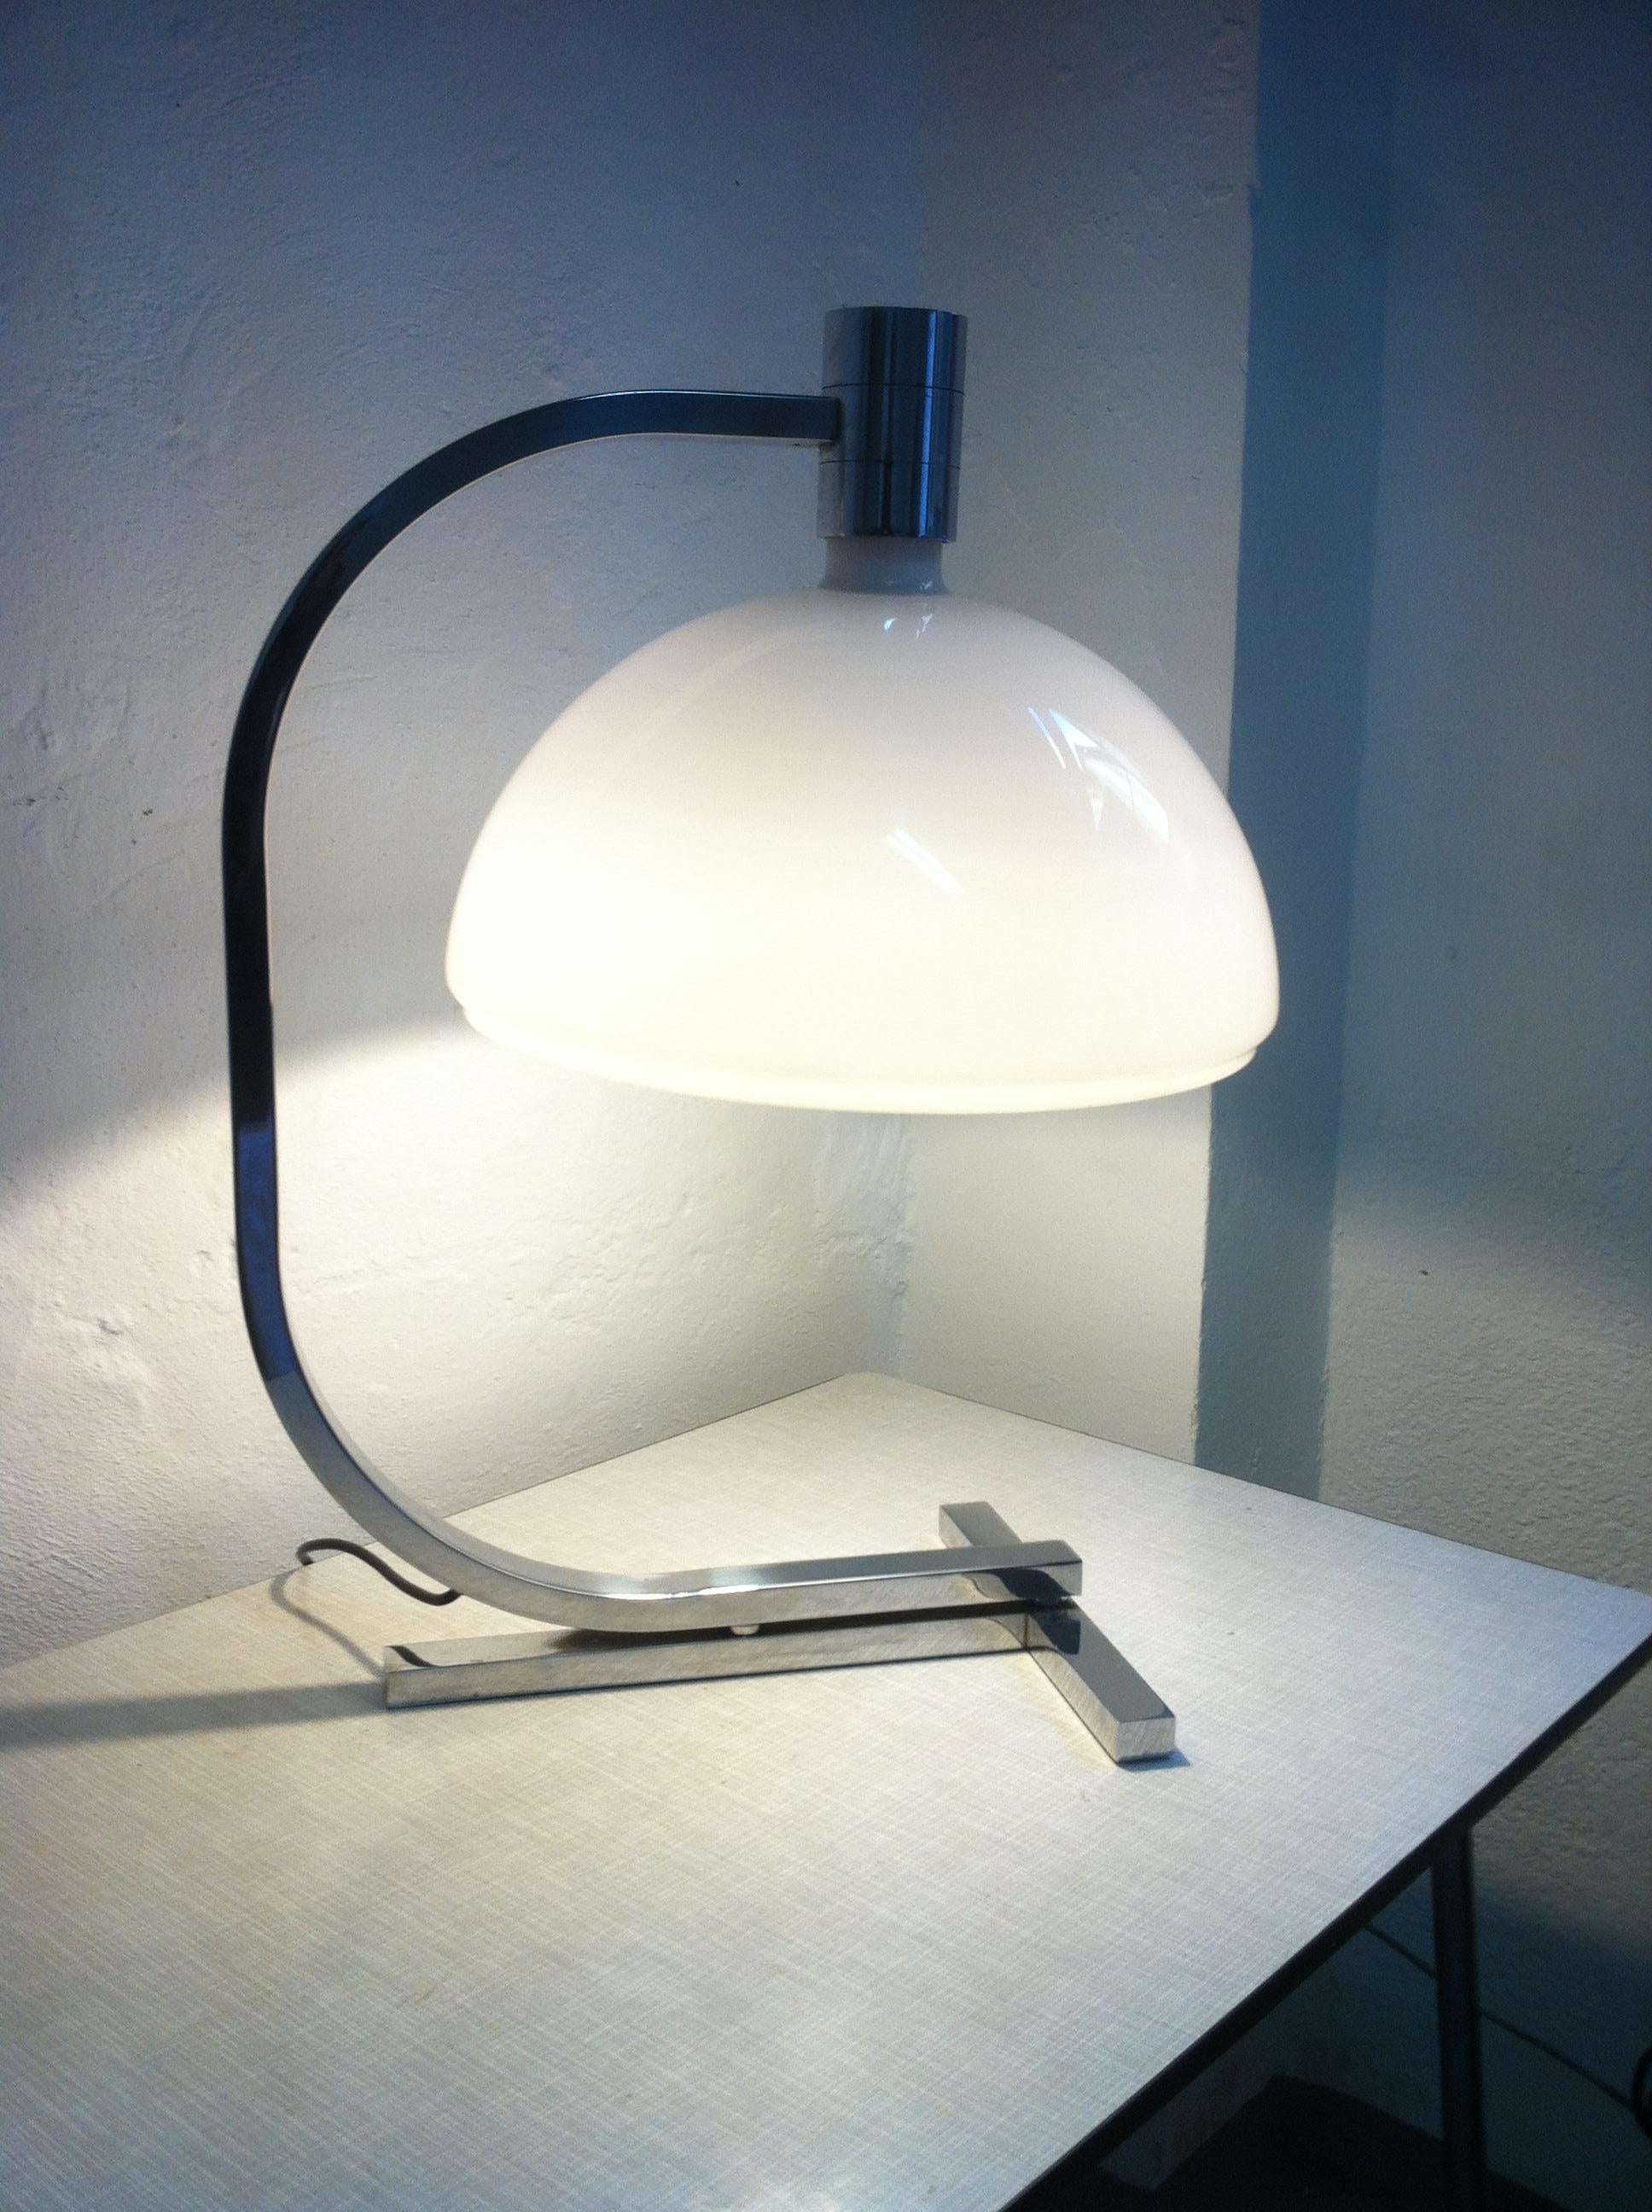 Midcentury AM/AS Table Lamp by Helg, Piva, and Albini for Sirrah Large, 1969 For Sale 7